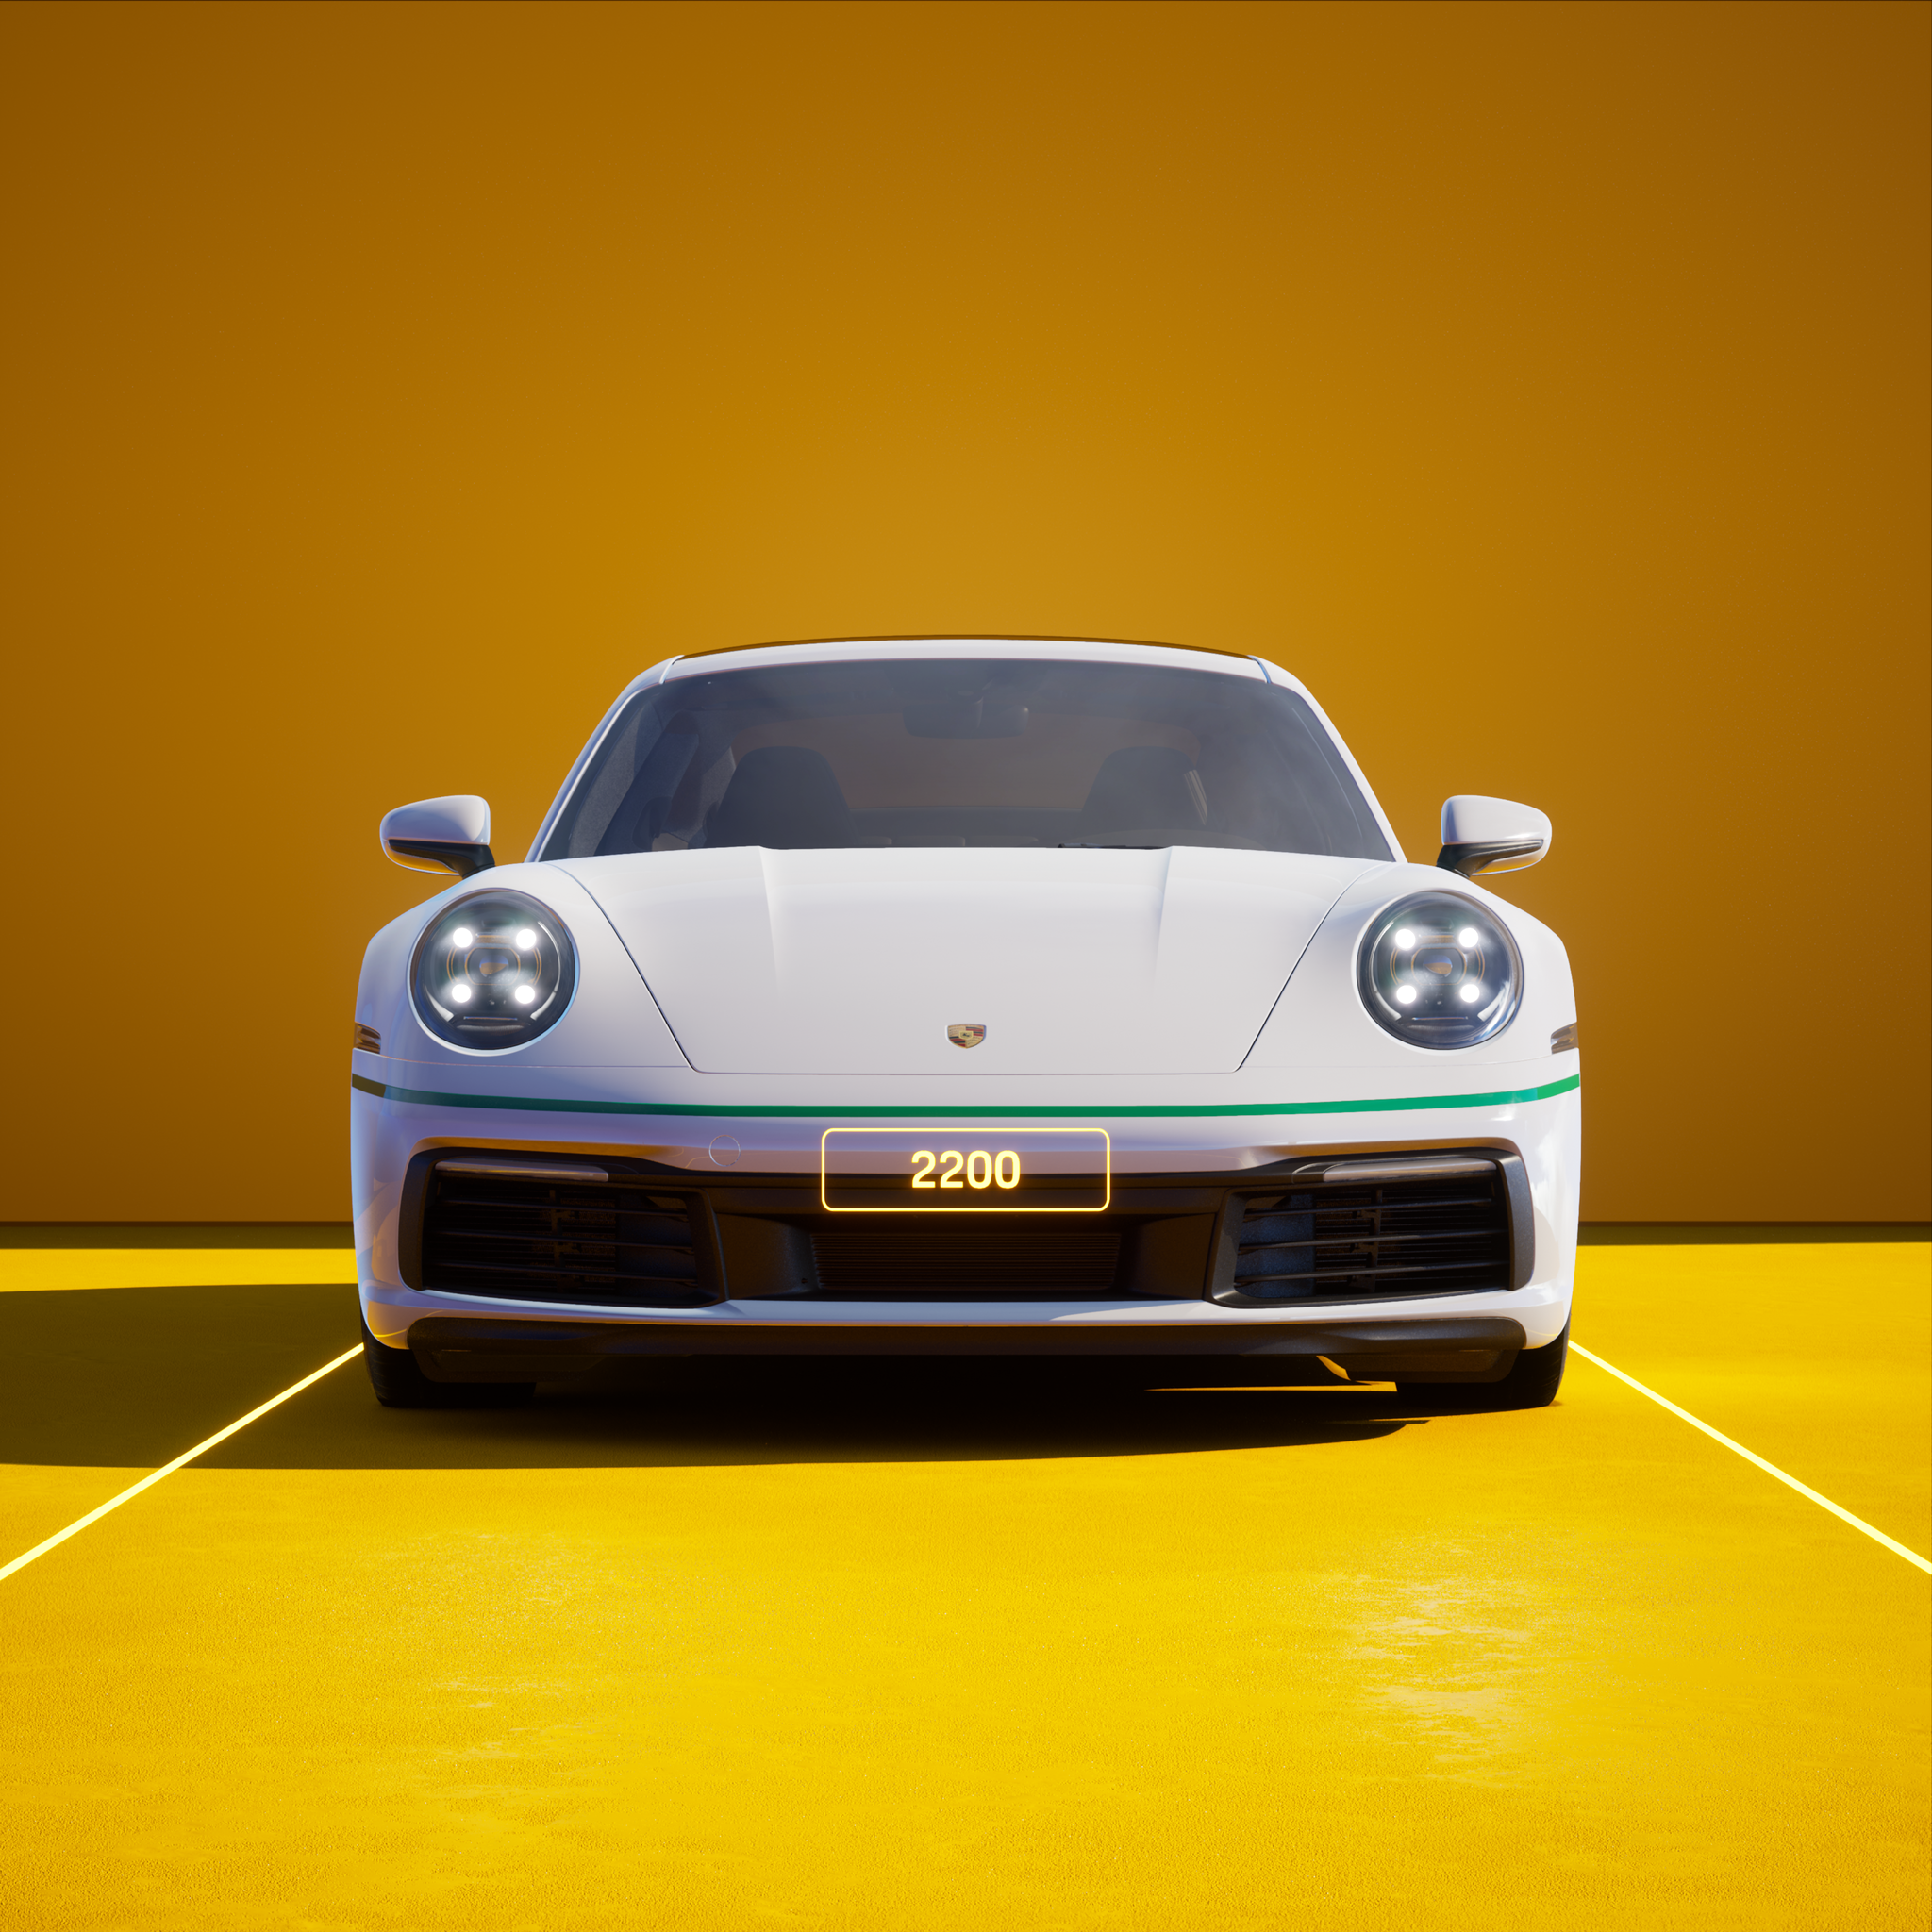 The PORSCHΞ 911 2200 image in phase